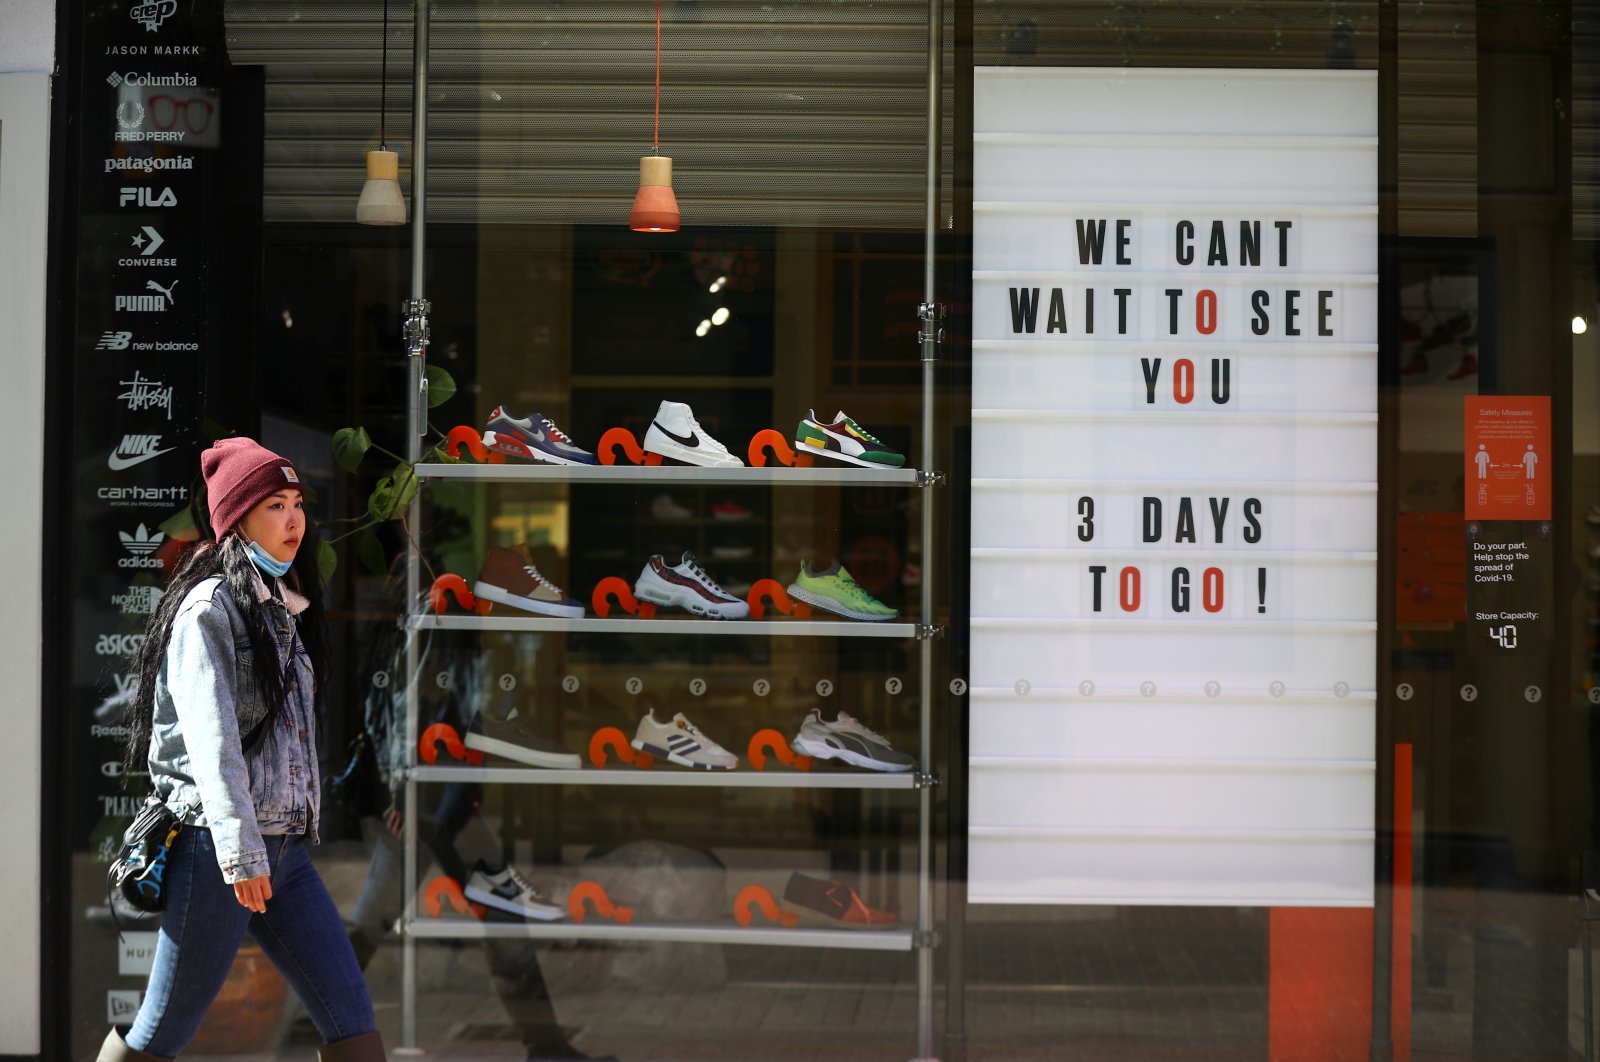 A pedestrian walks by a store being prepared for the reopening, as the coronavirus lockdown restrictions begin to ease, in London, Britain, April 9, 2021. (Reuters Photo)